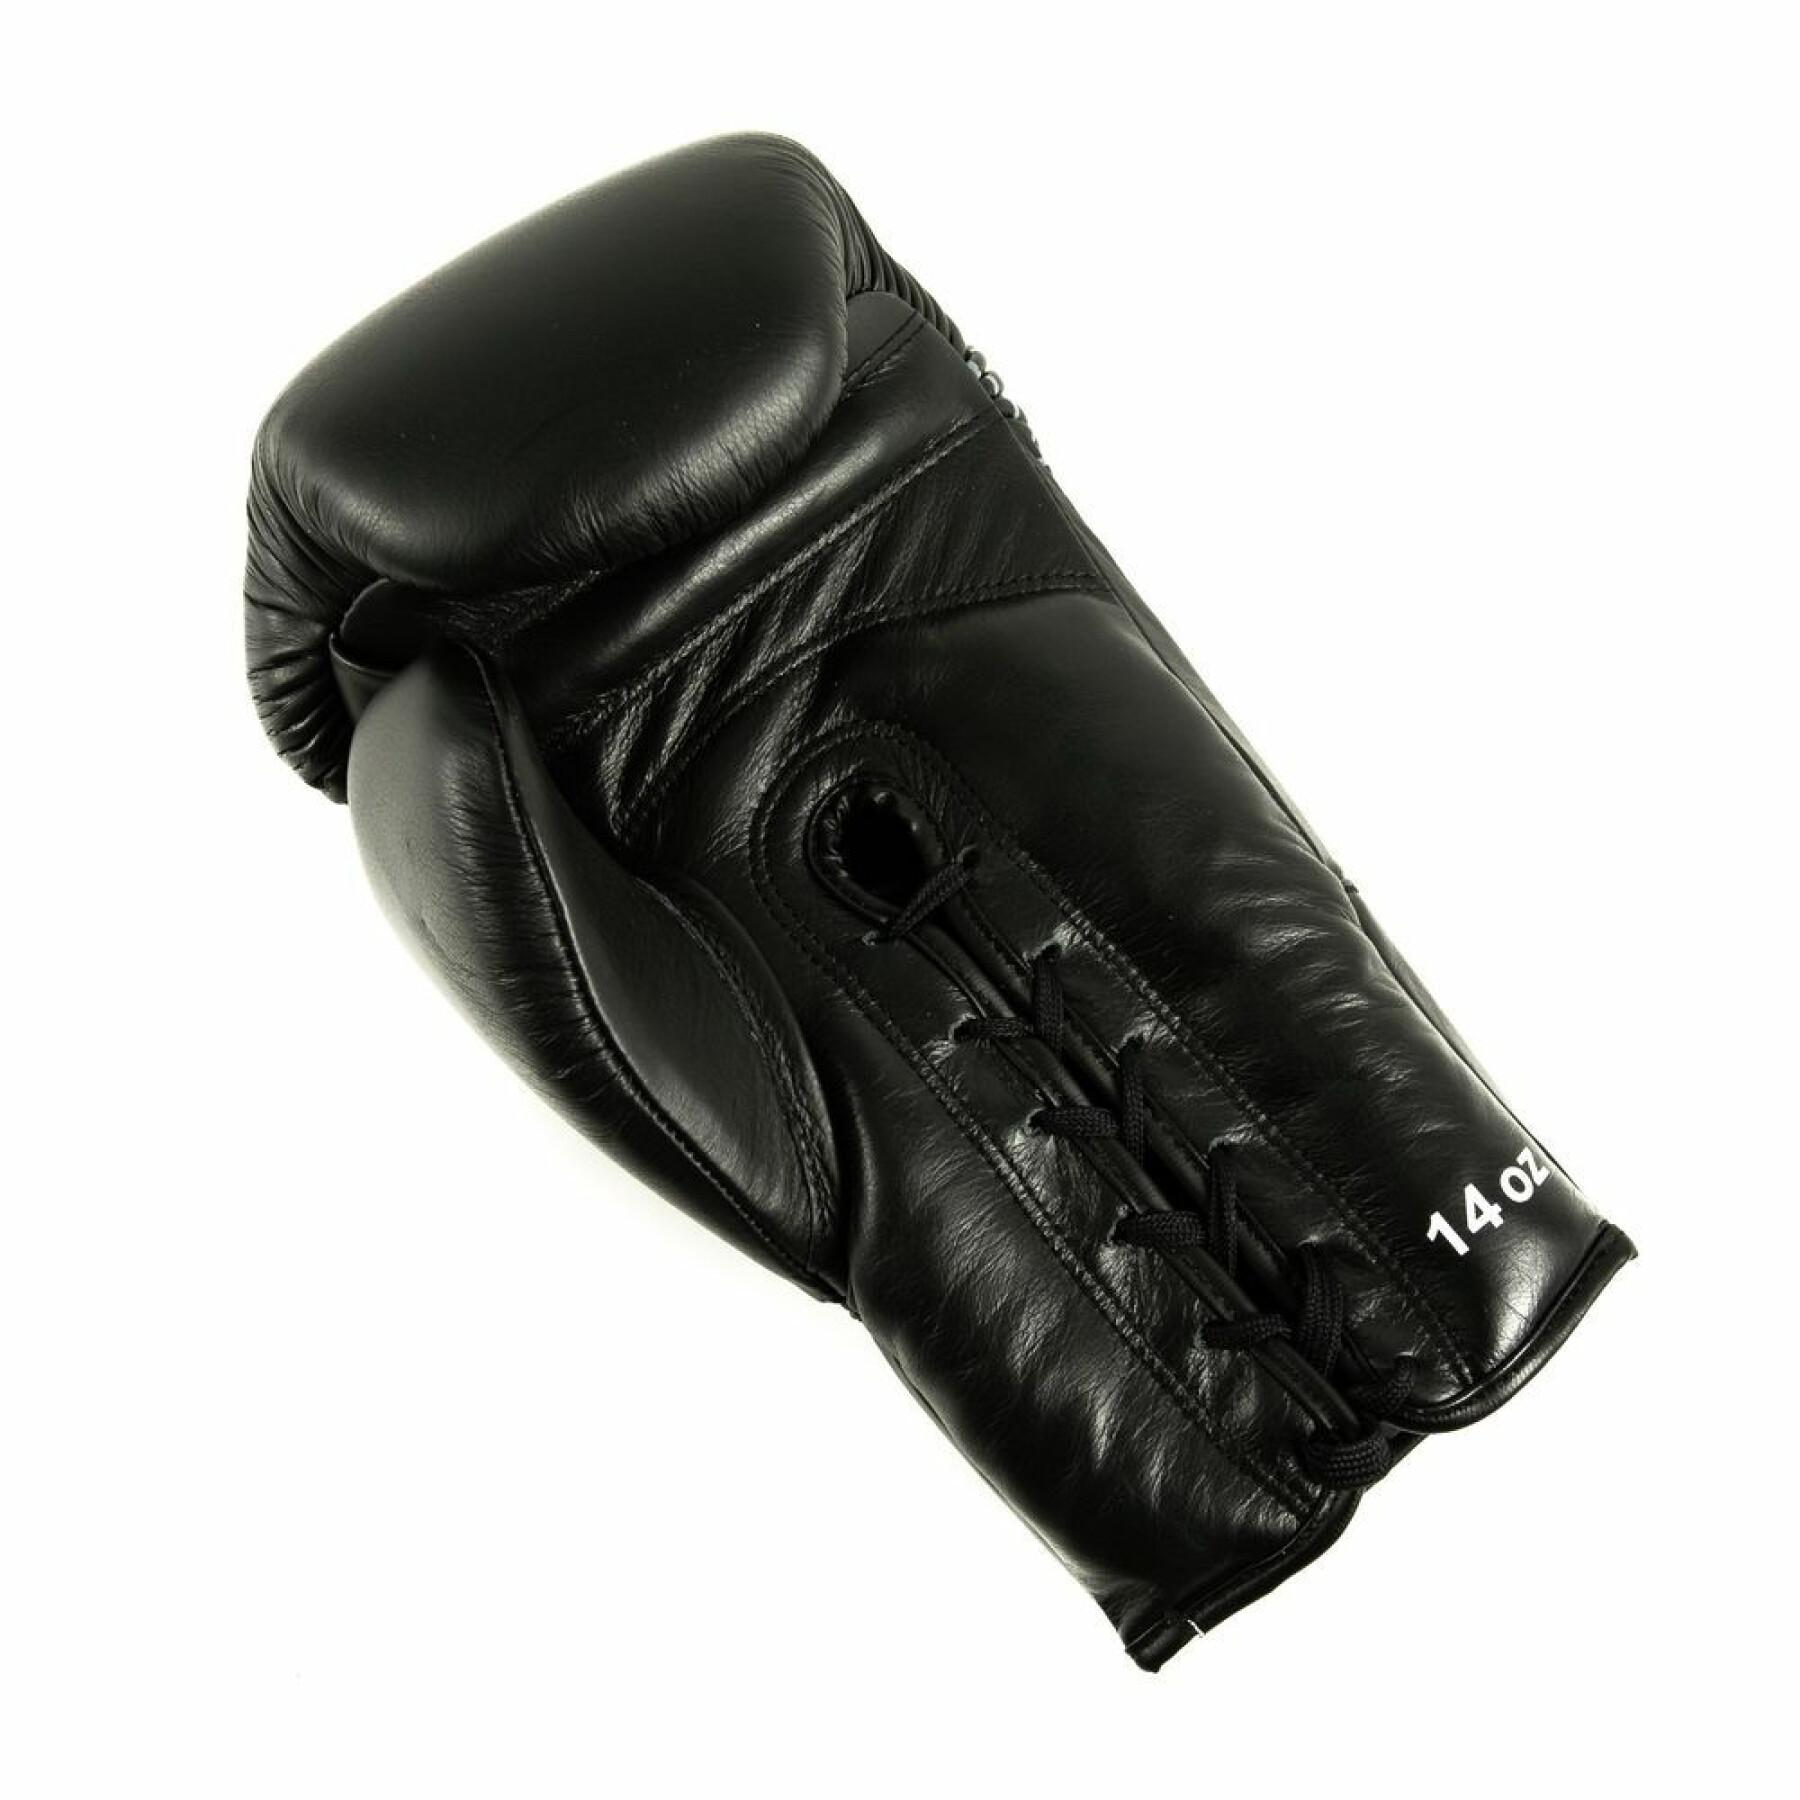 Boxing gloves Booster Fight Gear Pro Shield 2 Laced